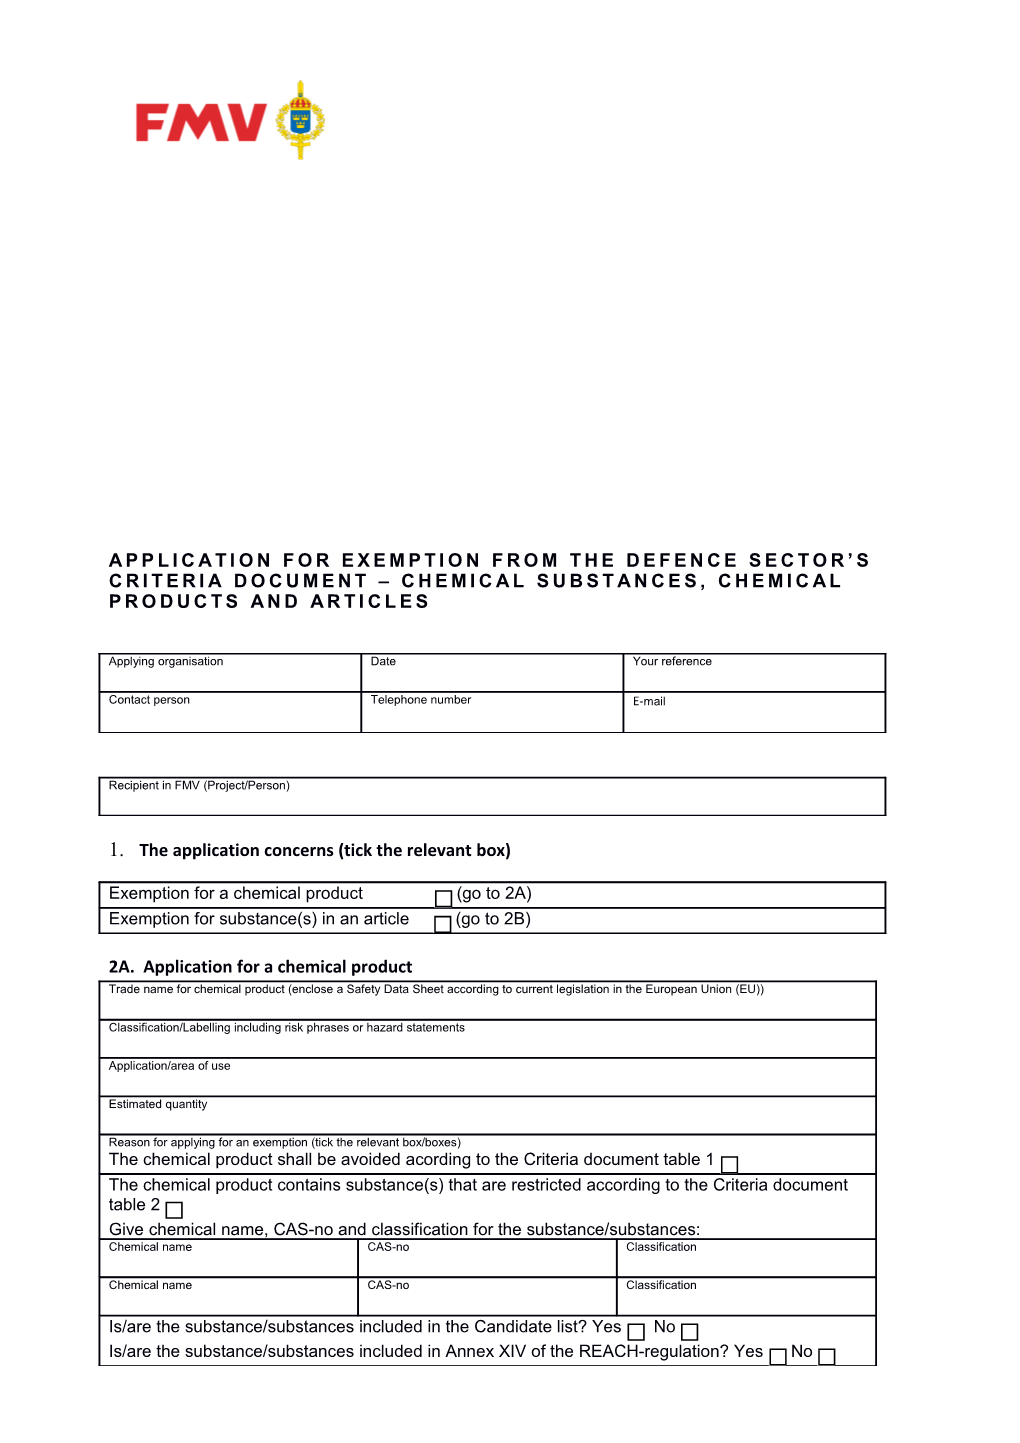 2A. Application for a Chemical Product